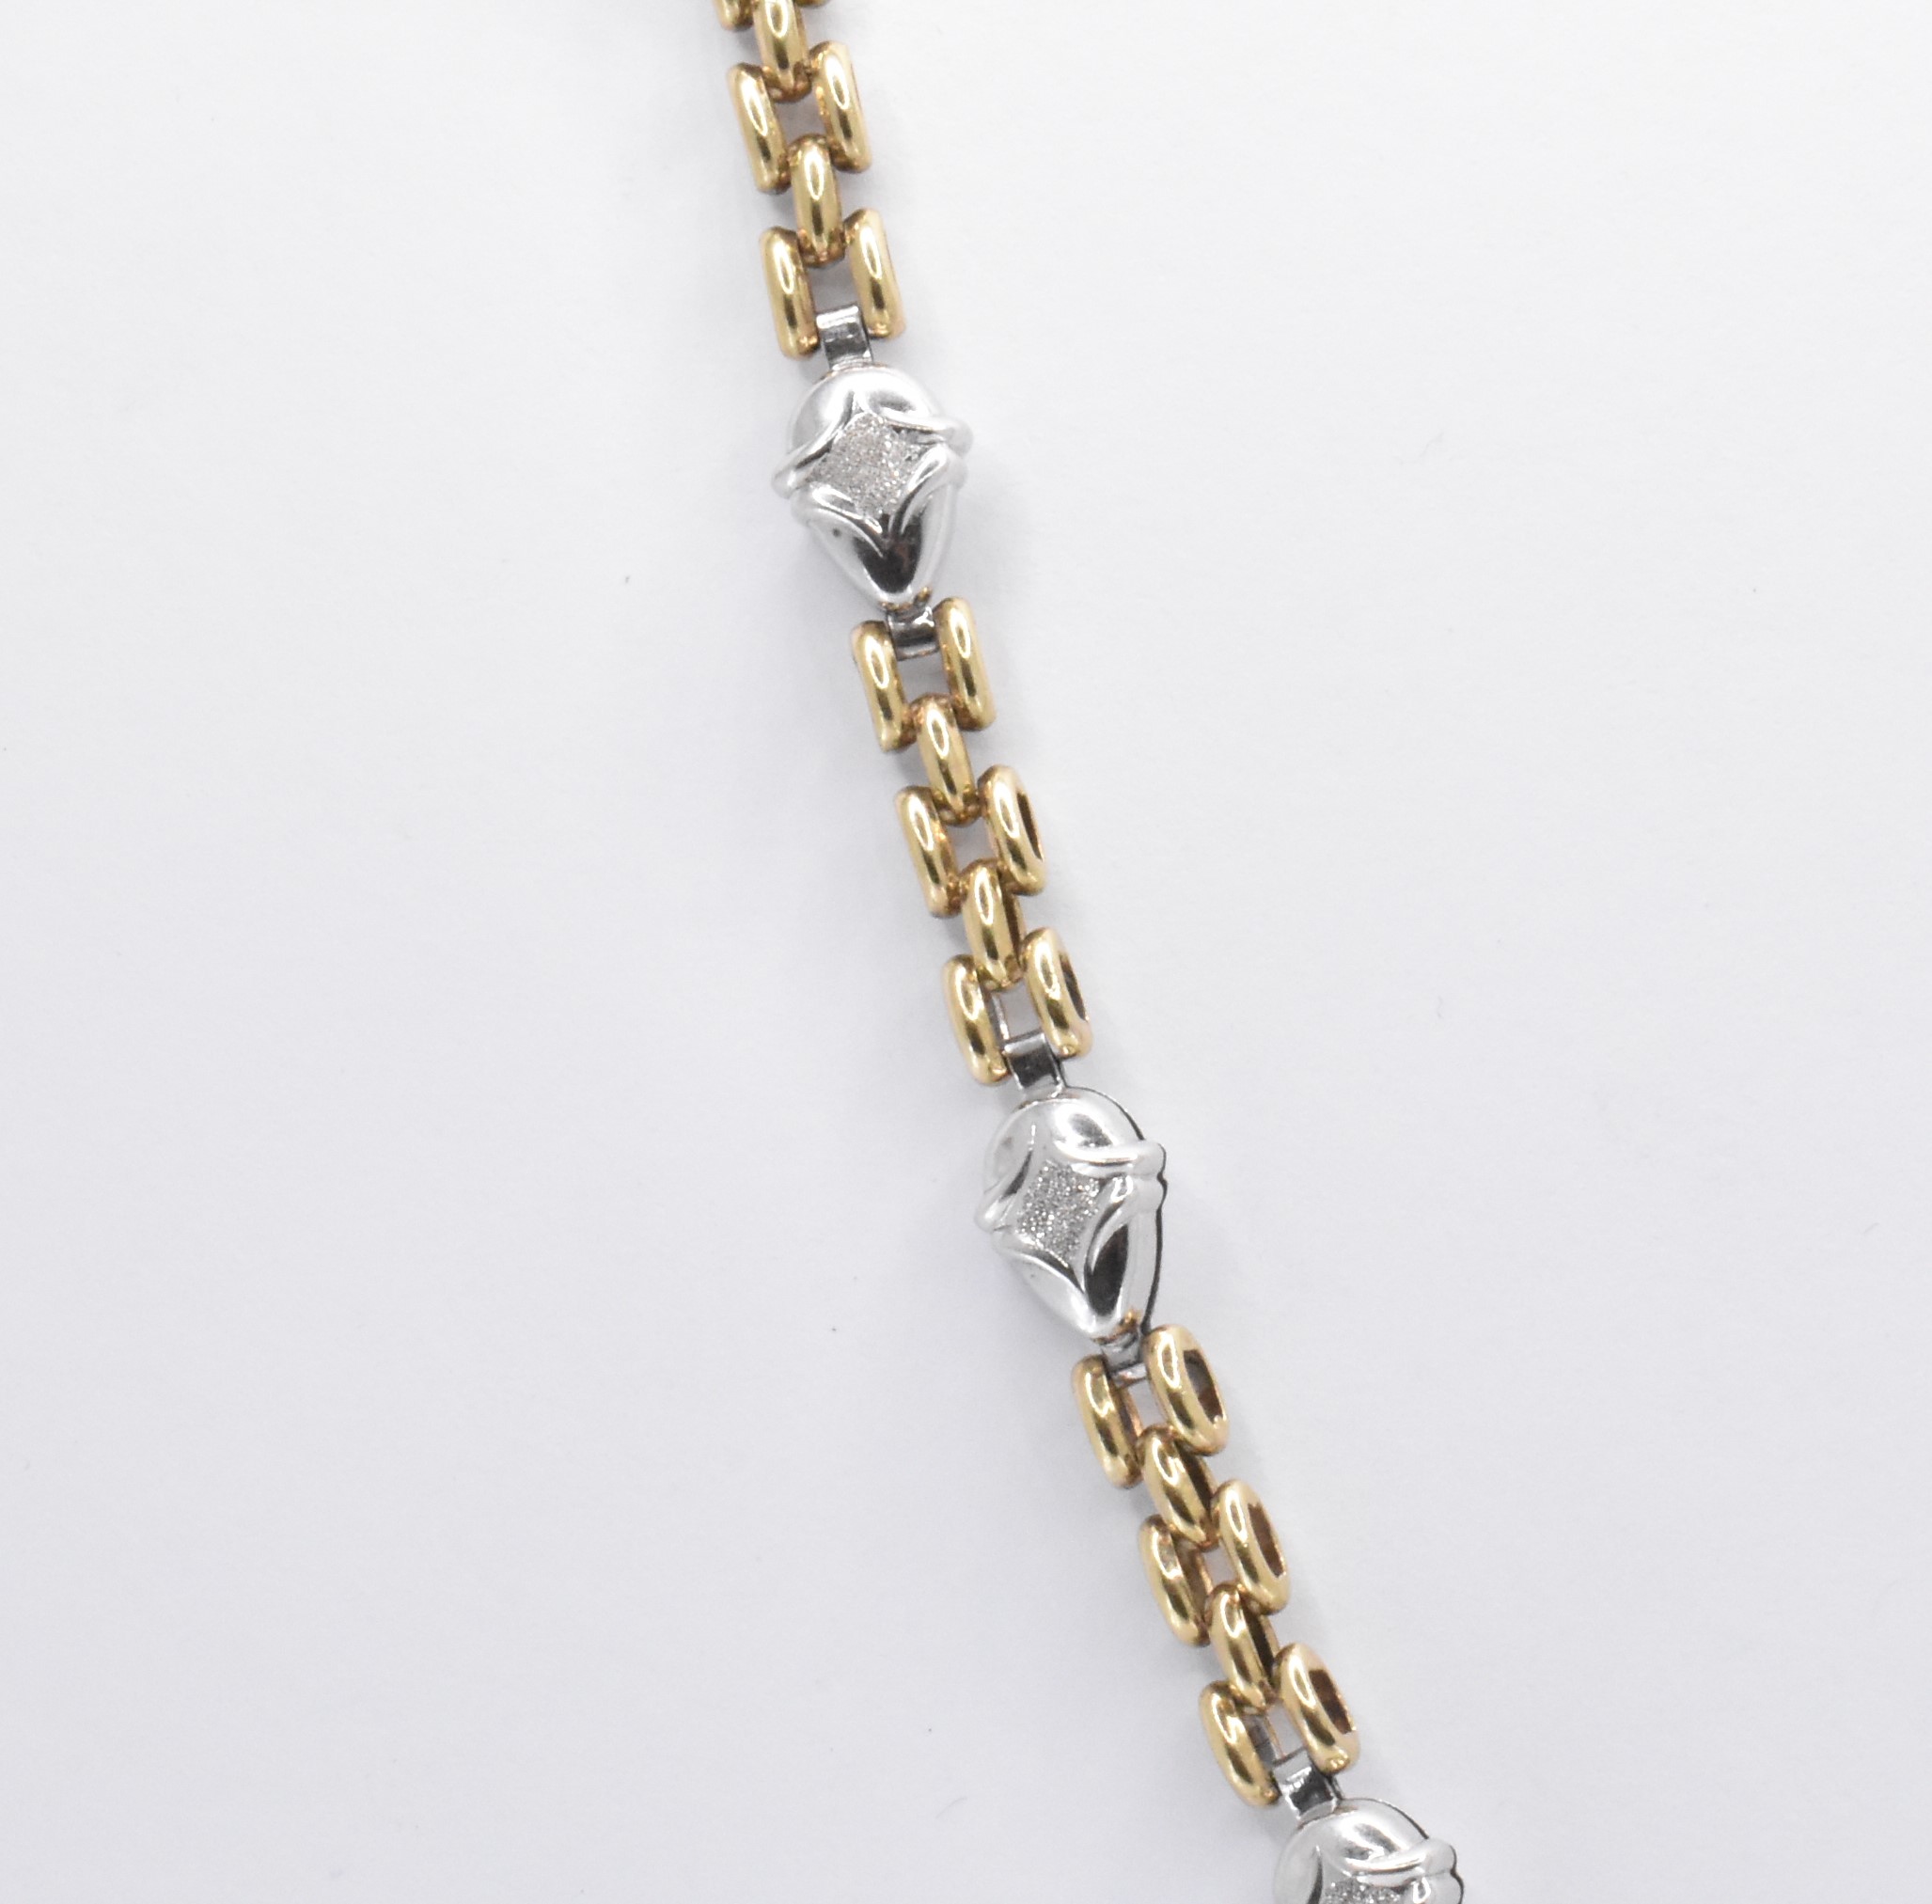 HALLMARKED 9CT GOLD TWO TONE FANCY LINK CHAIN NECKLACE - Image 4 of 5